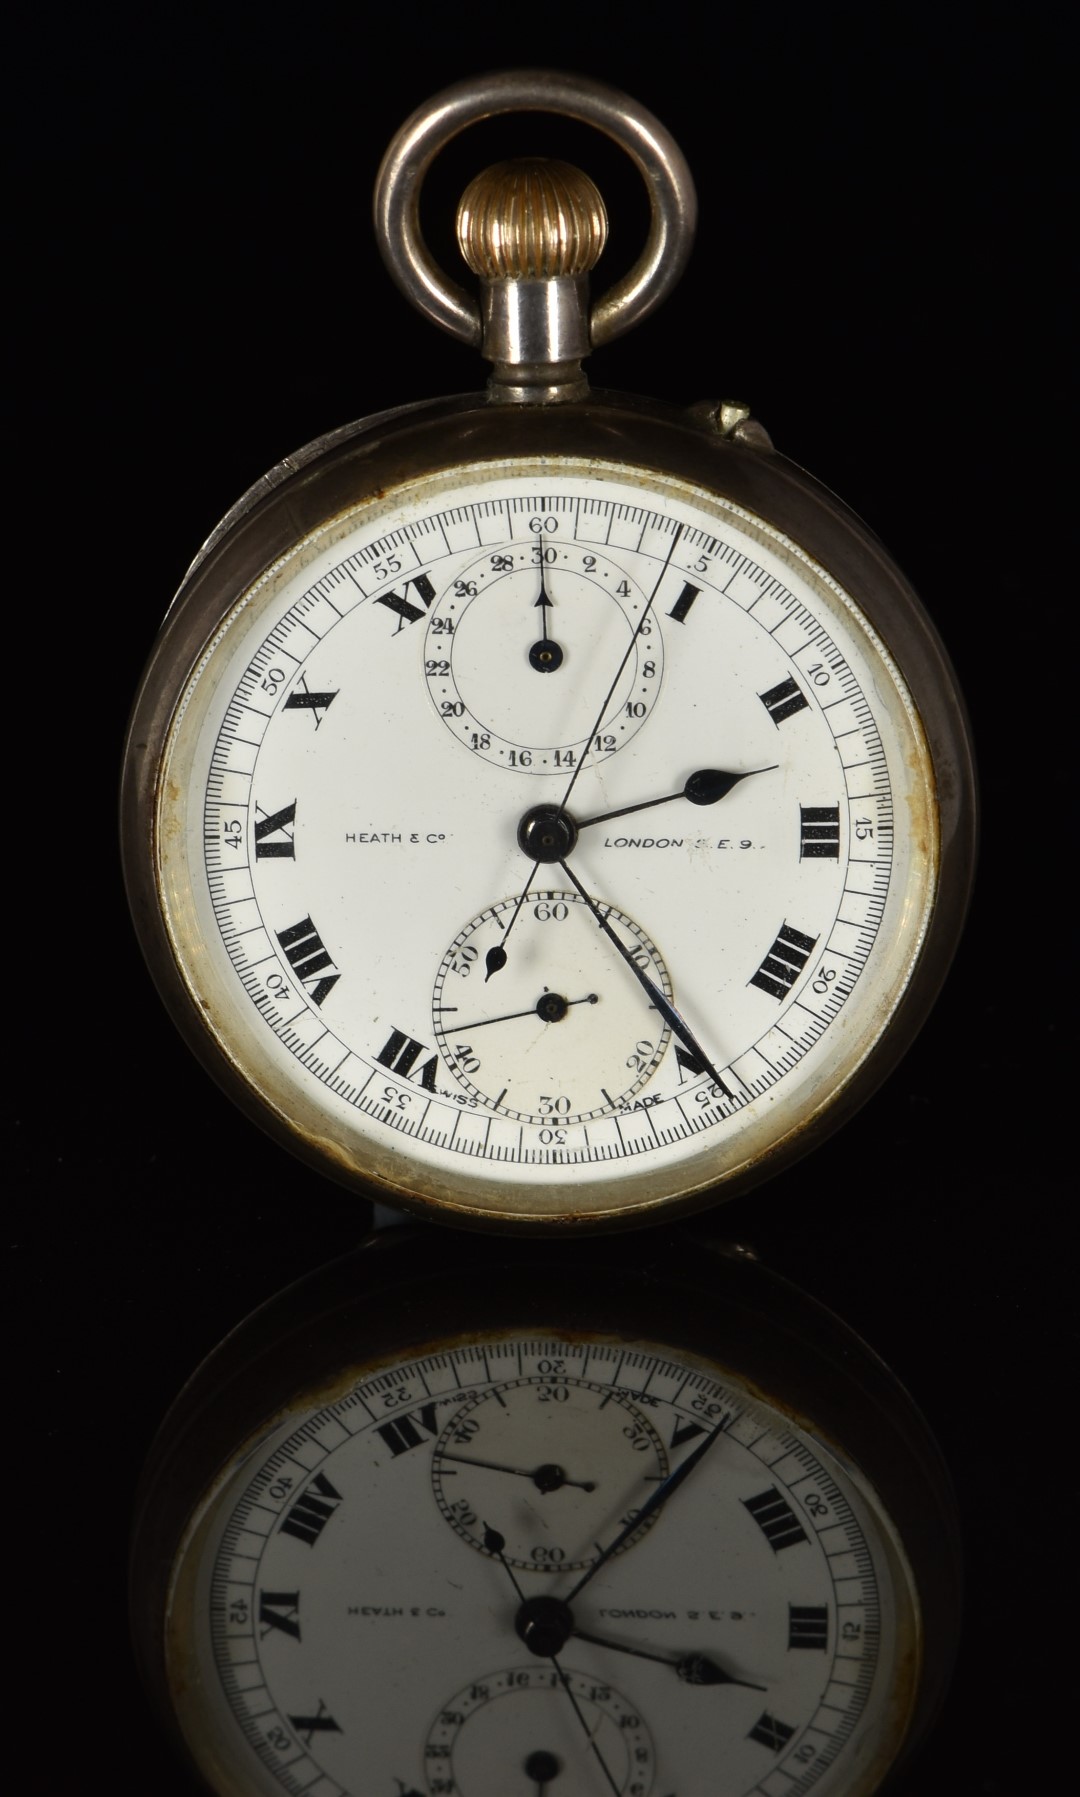 Heath & Co of London silver keyless winding open faced chronograph pocket watch with blued hands,